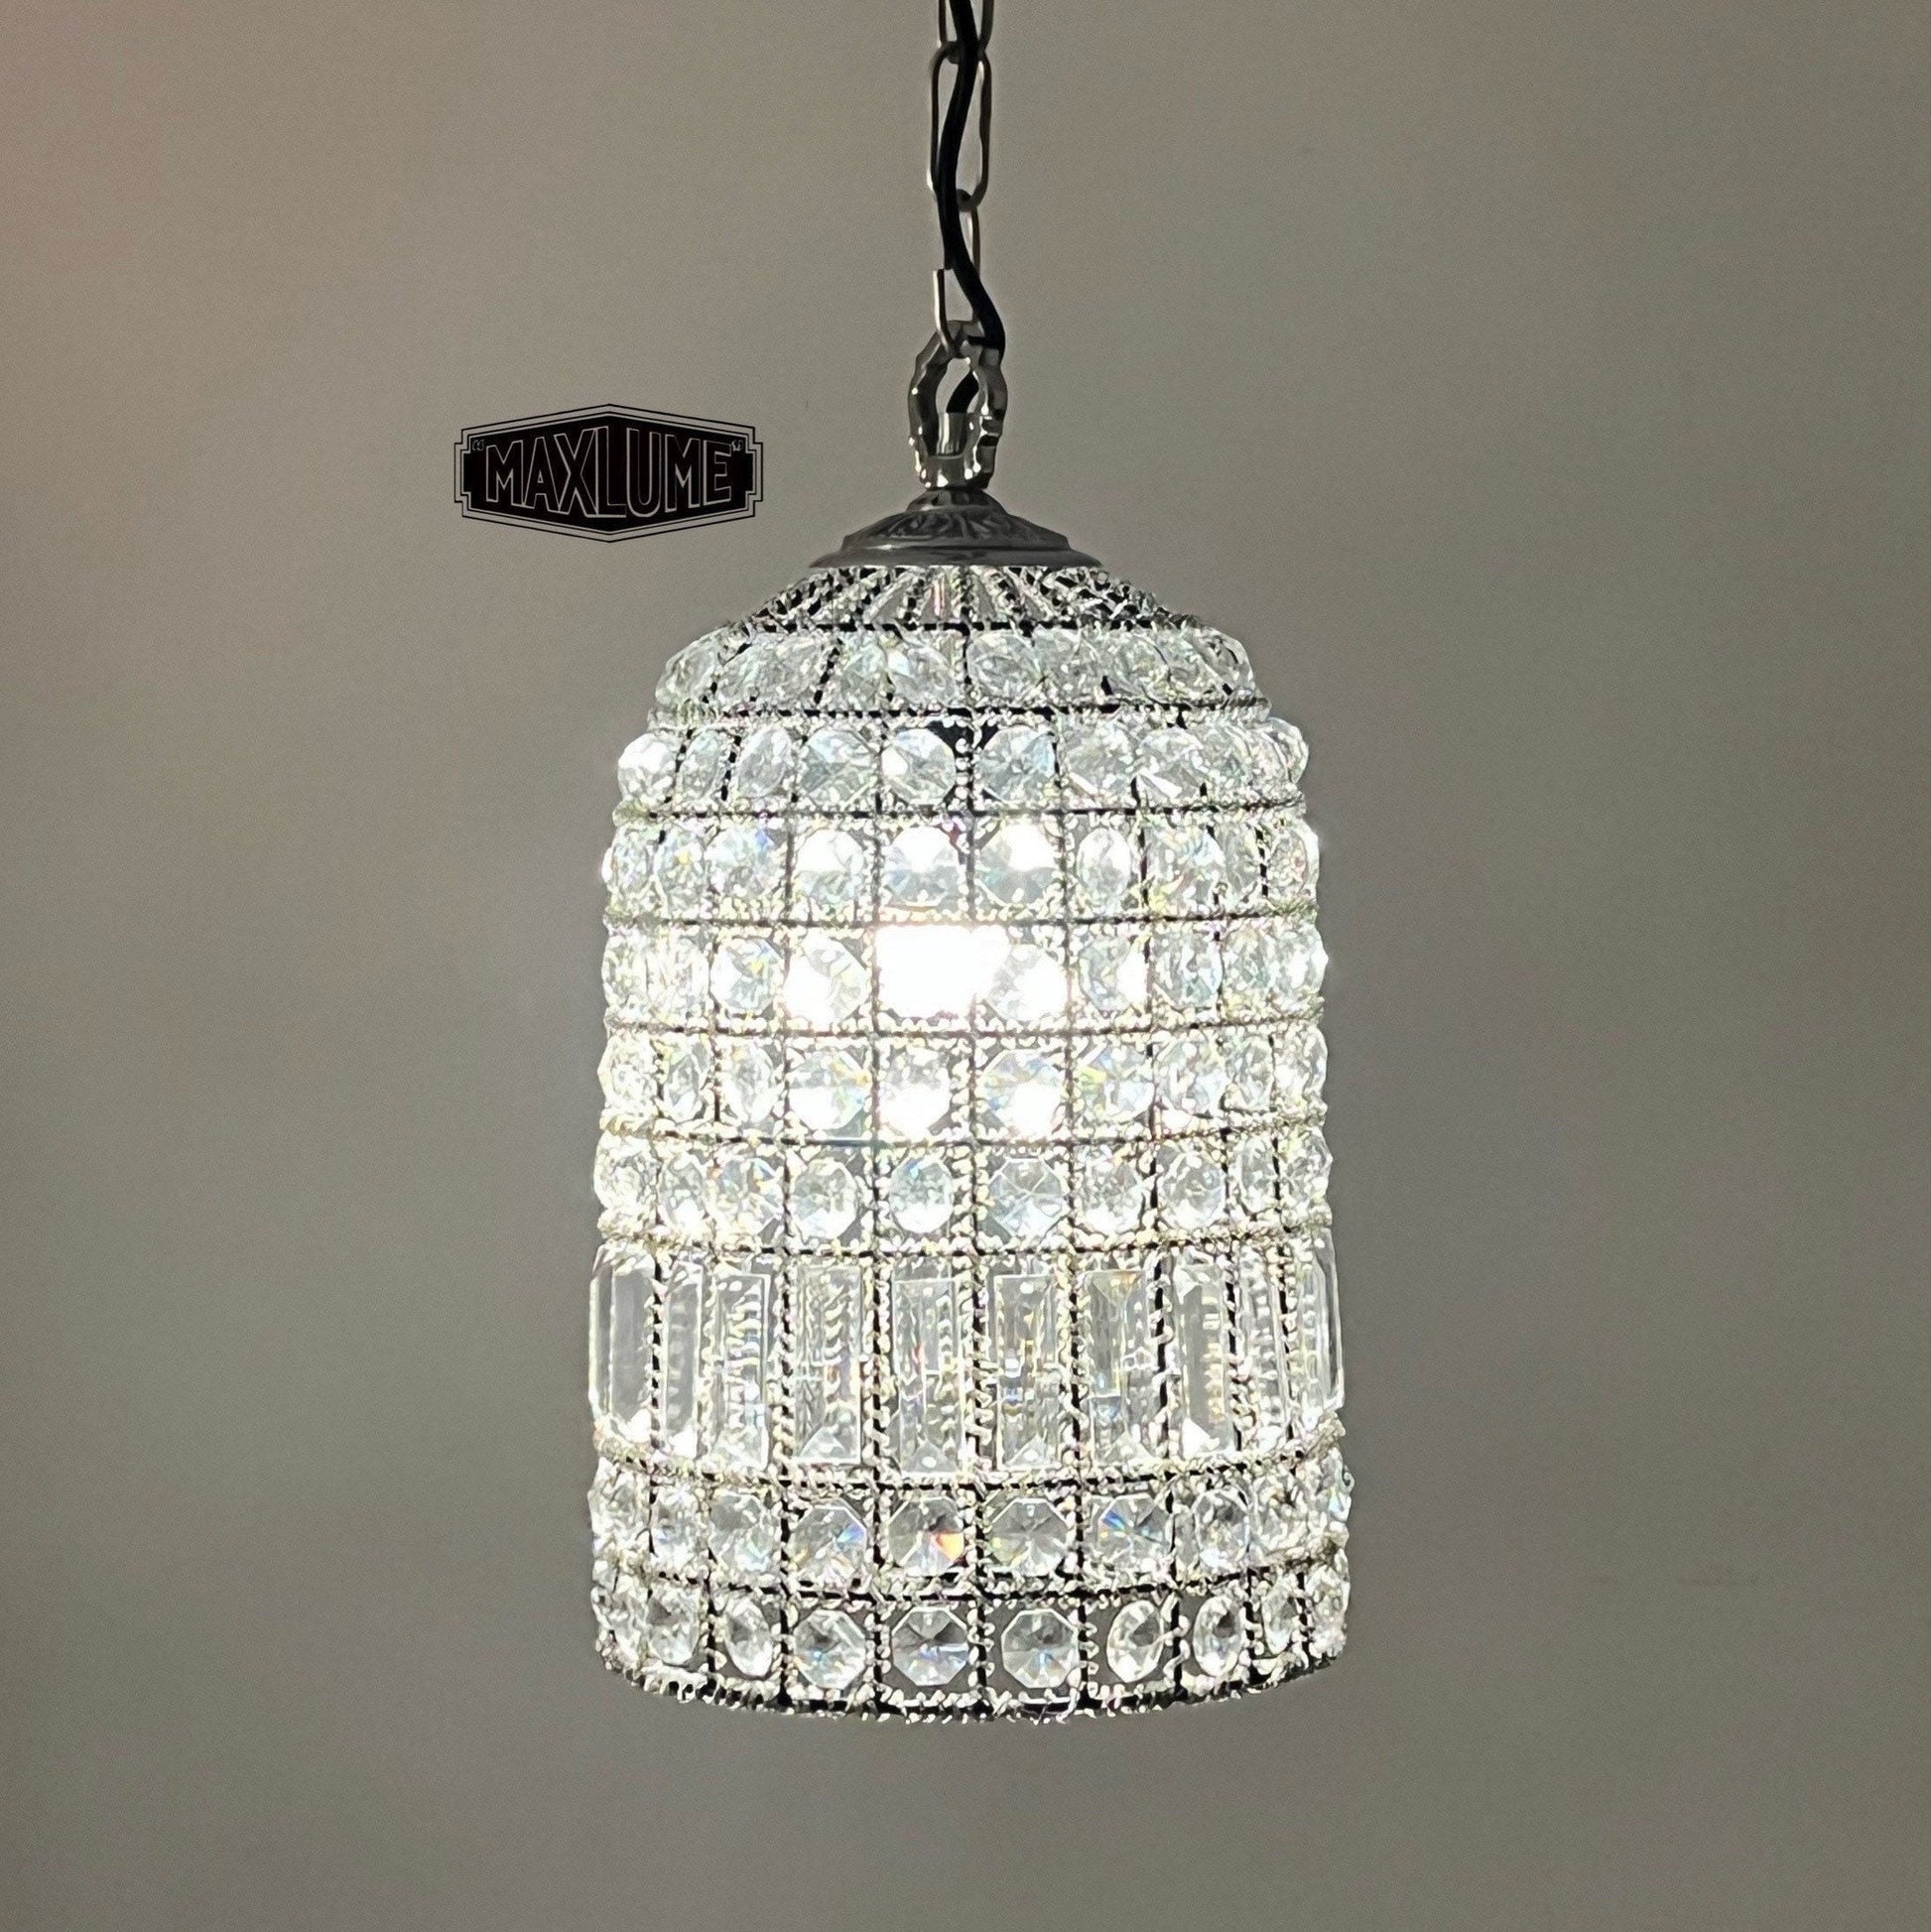 Bixley ~ French Glass Bird Cage Luxury Chandelier Light Dining Room Ceiling Pendant 9.5 Inch